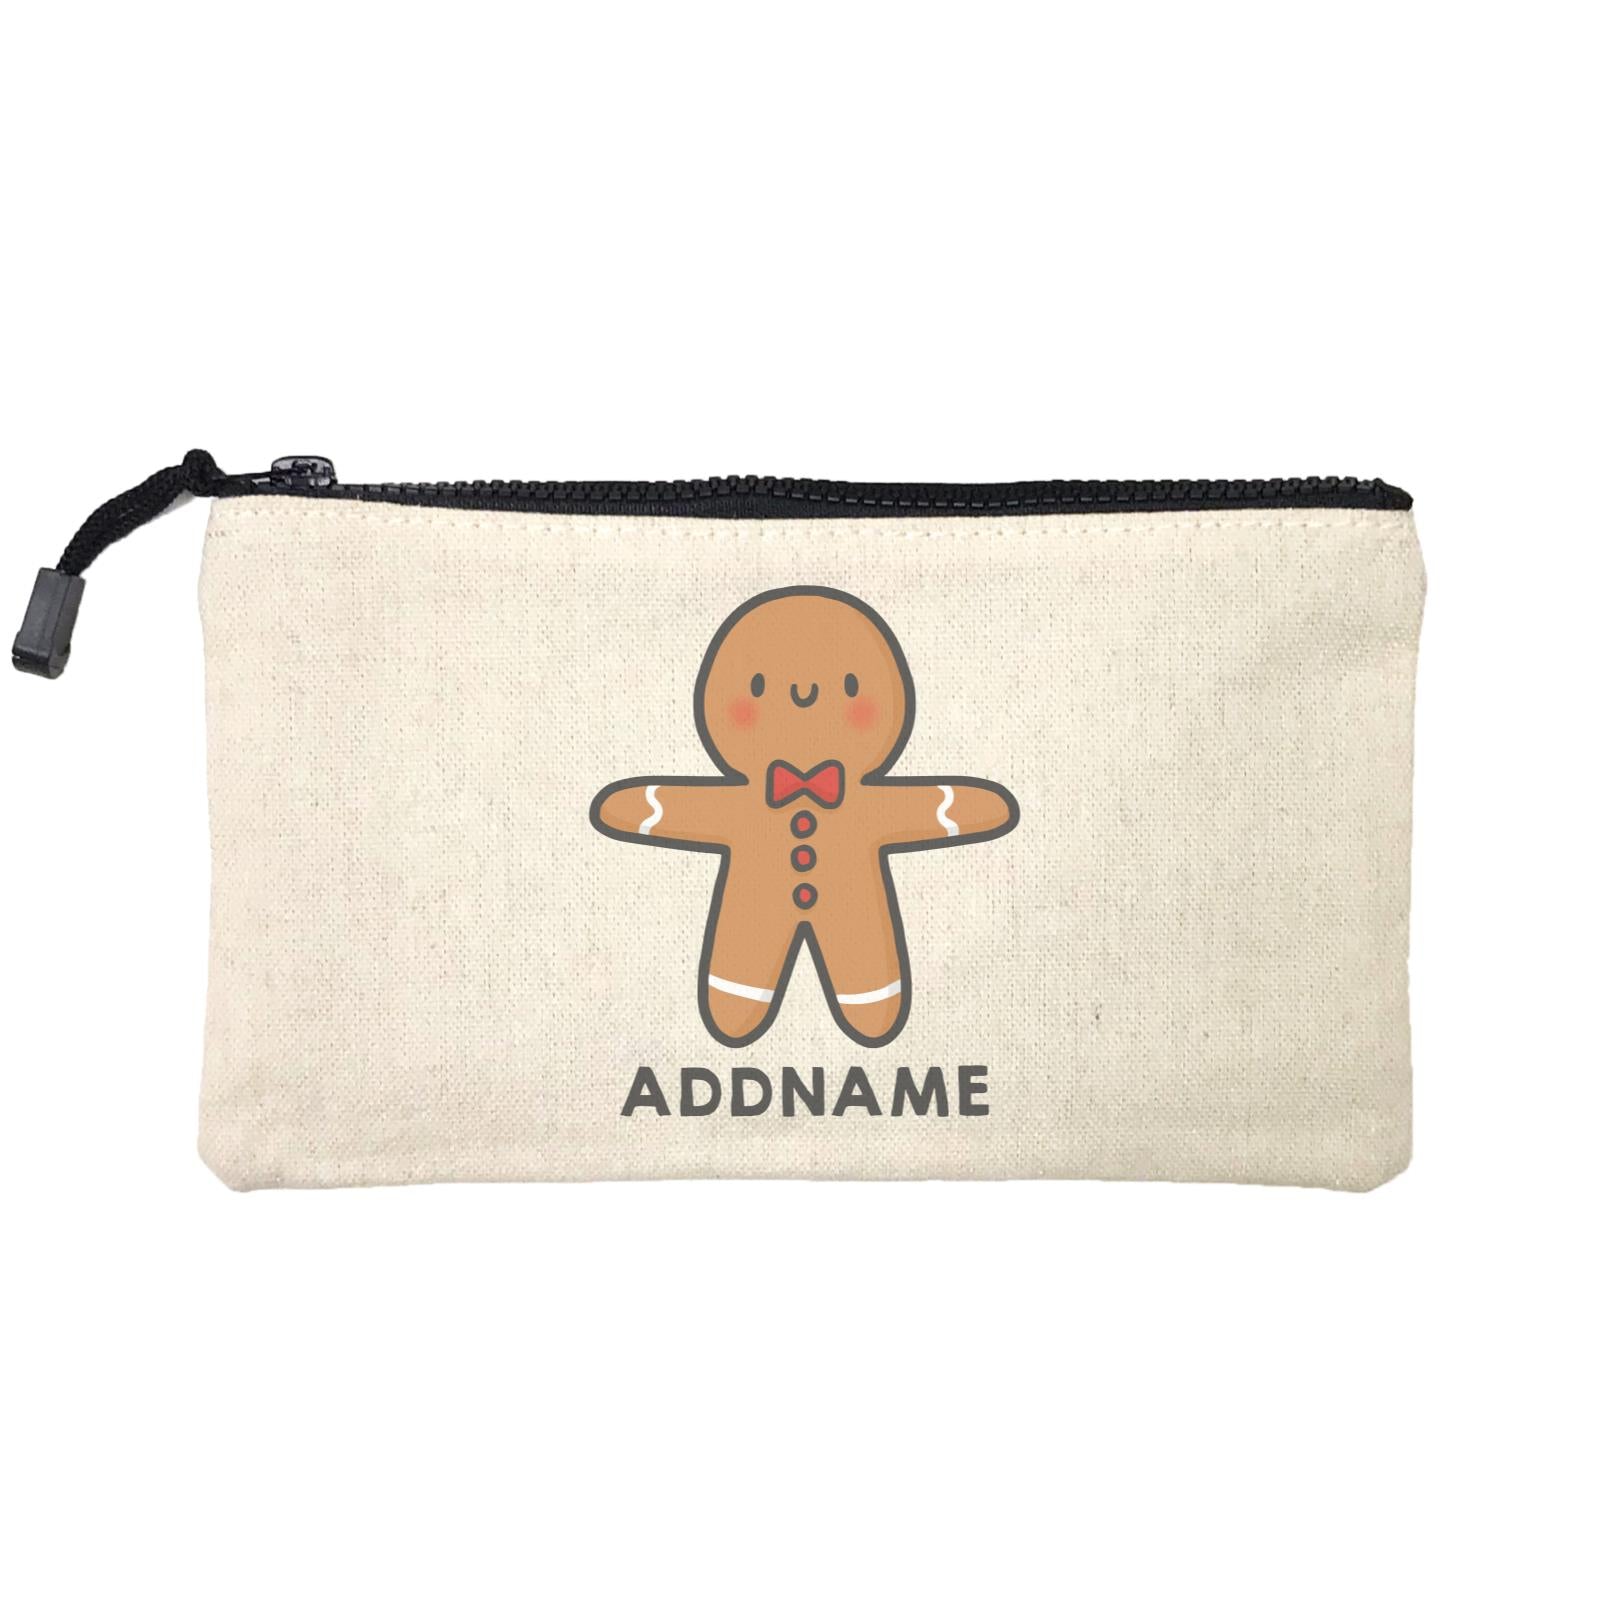 Xmas Cute Gingerbread Man Addname Mini Accessories Stationery Pouch